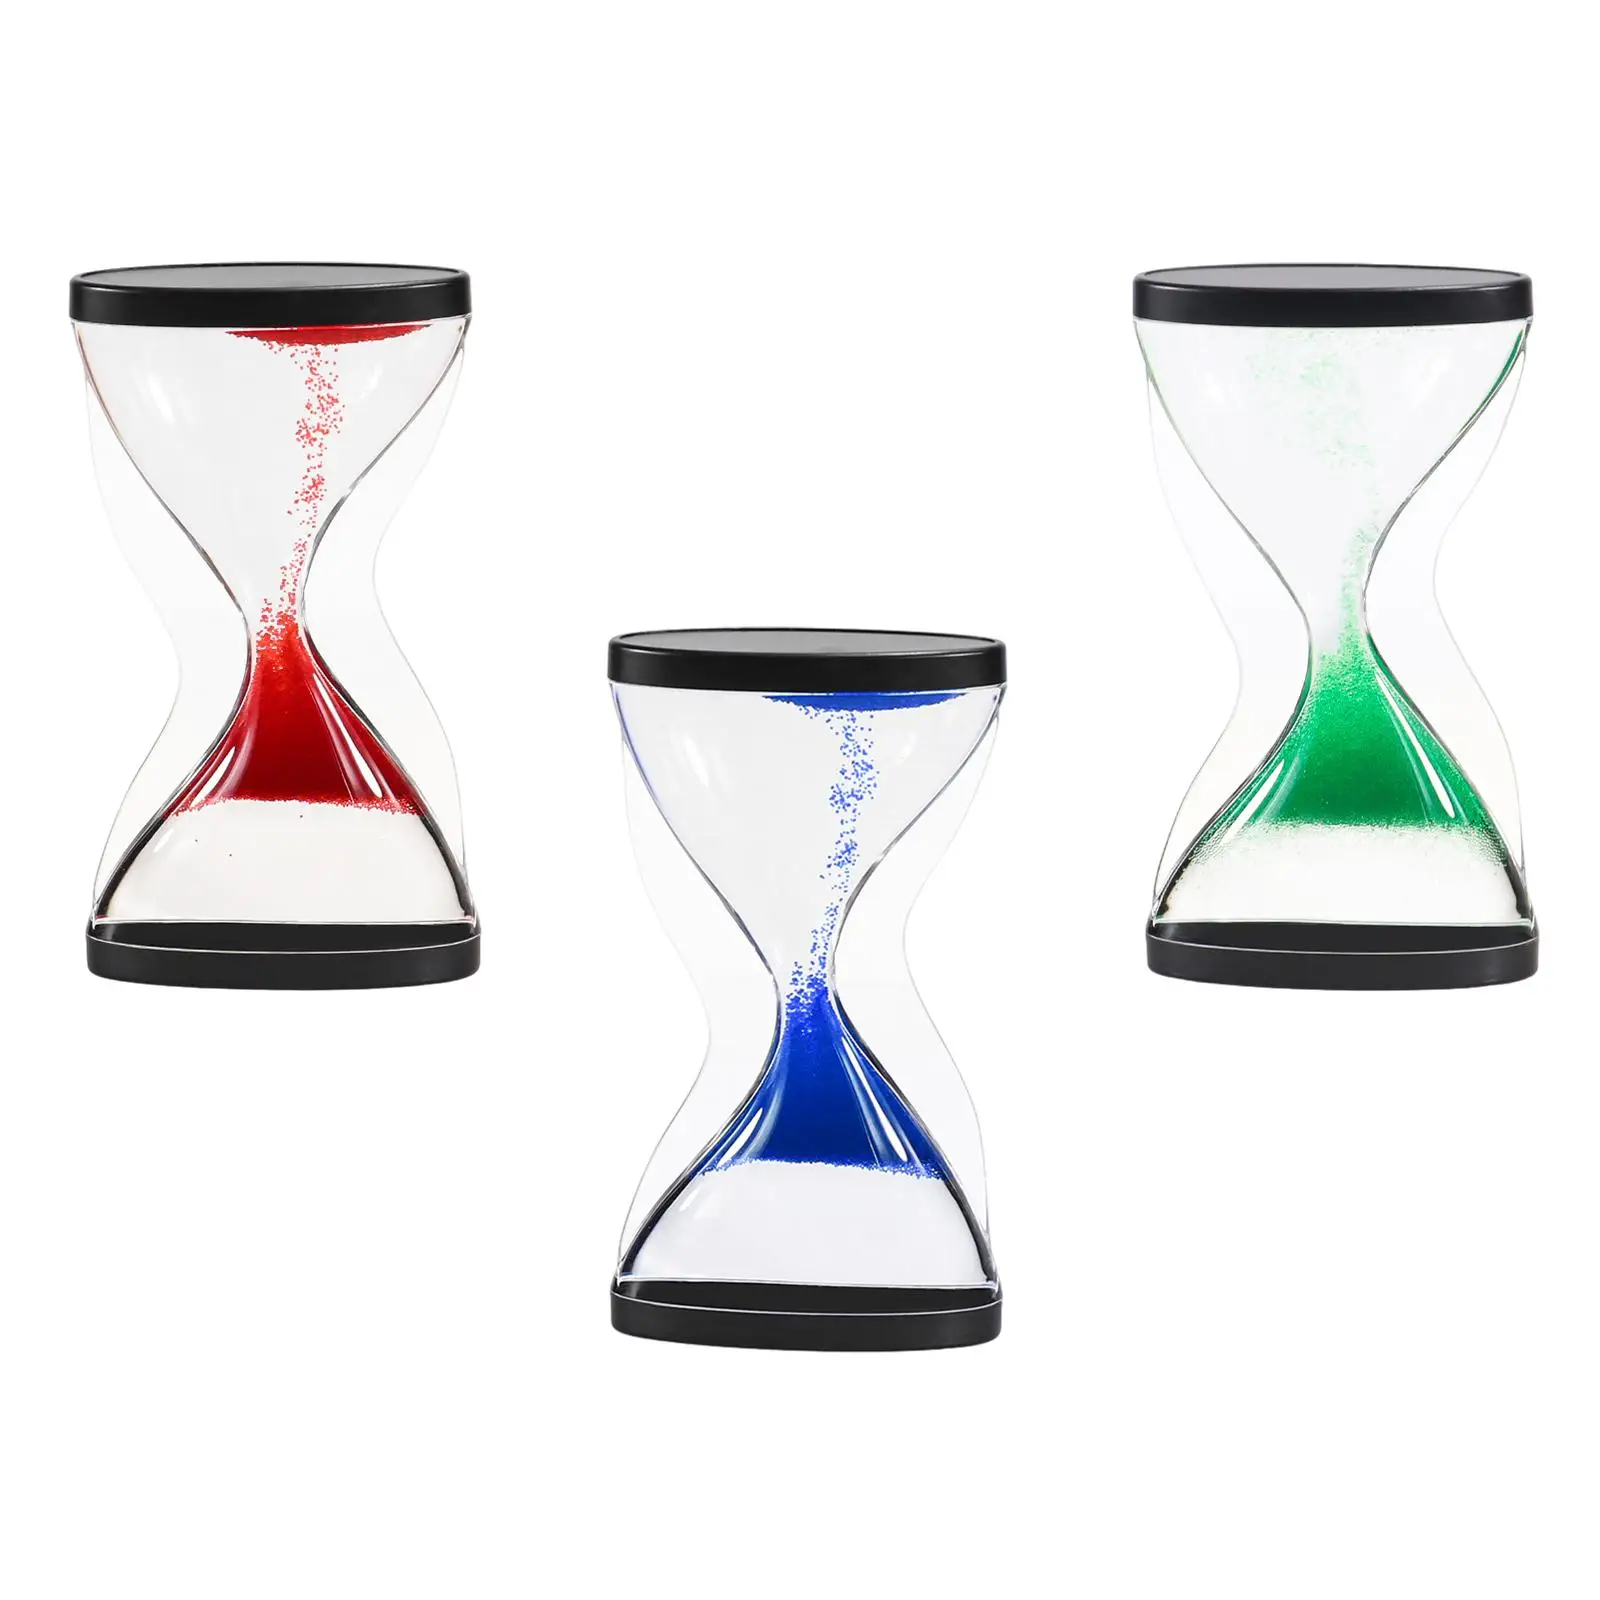 Liquid Hourglass Timer Liquid Motion Bubbler Timer for Kids Adults Toddlers